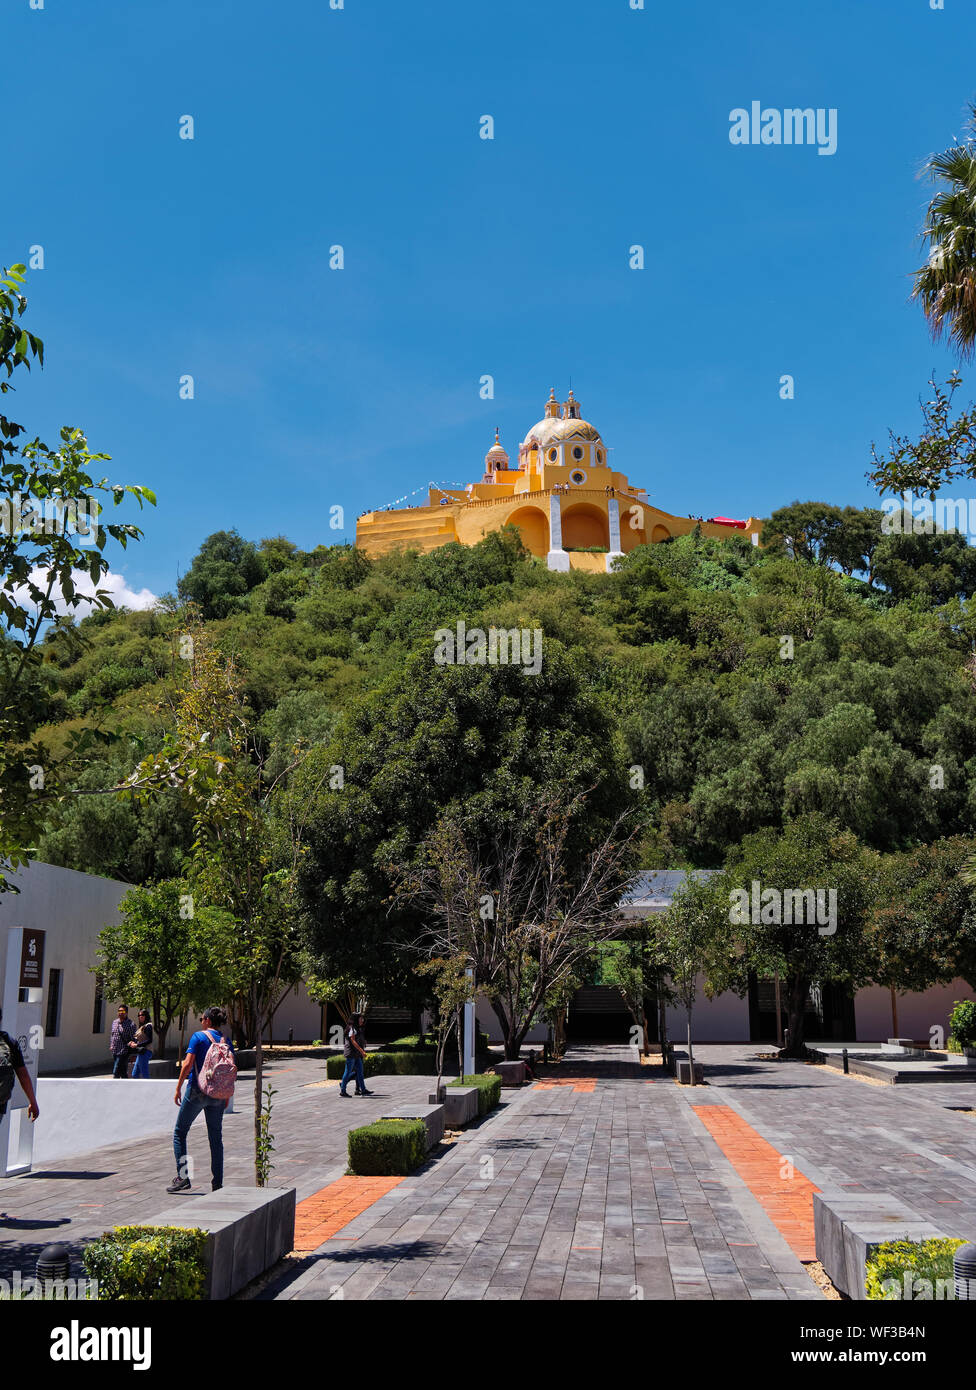 San Andres Cholula, Mexico, September 30, 2018 - Beautiful Shrine of Our Lady of Remedies sanctuary with people in Regional Museum at sunny day with blue sky. Stock Photo